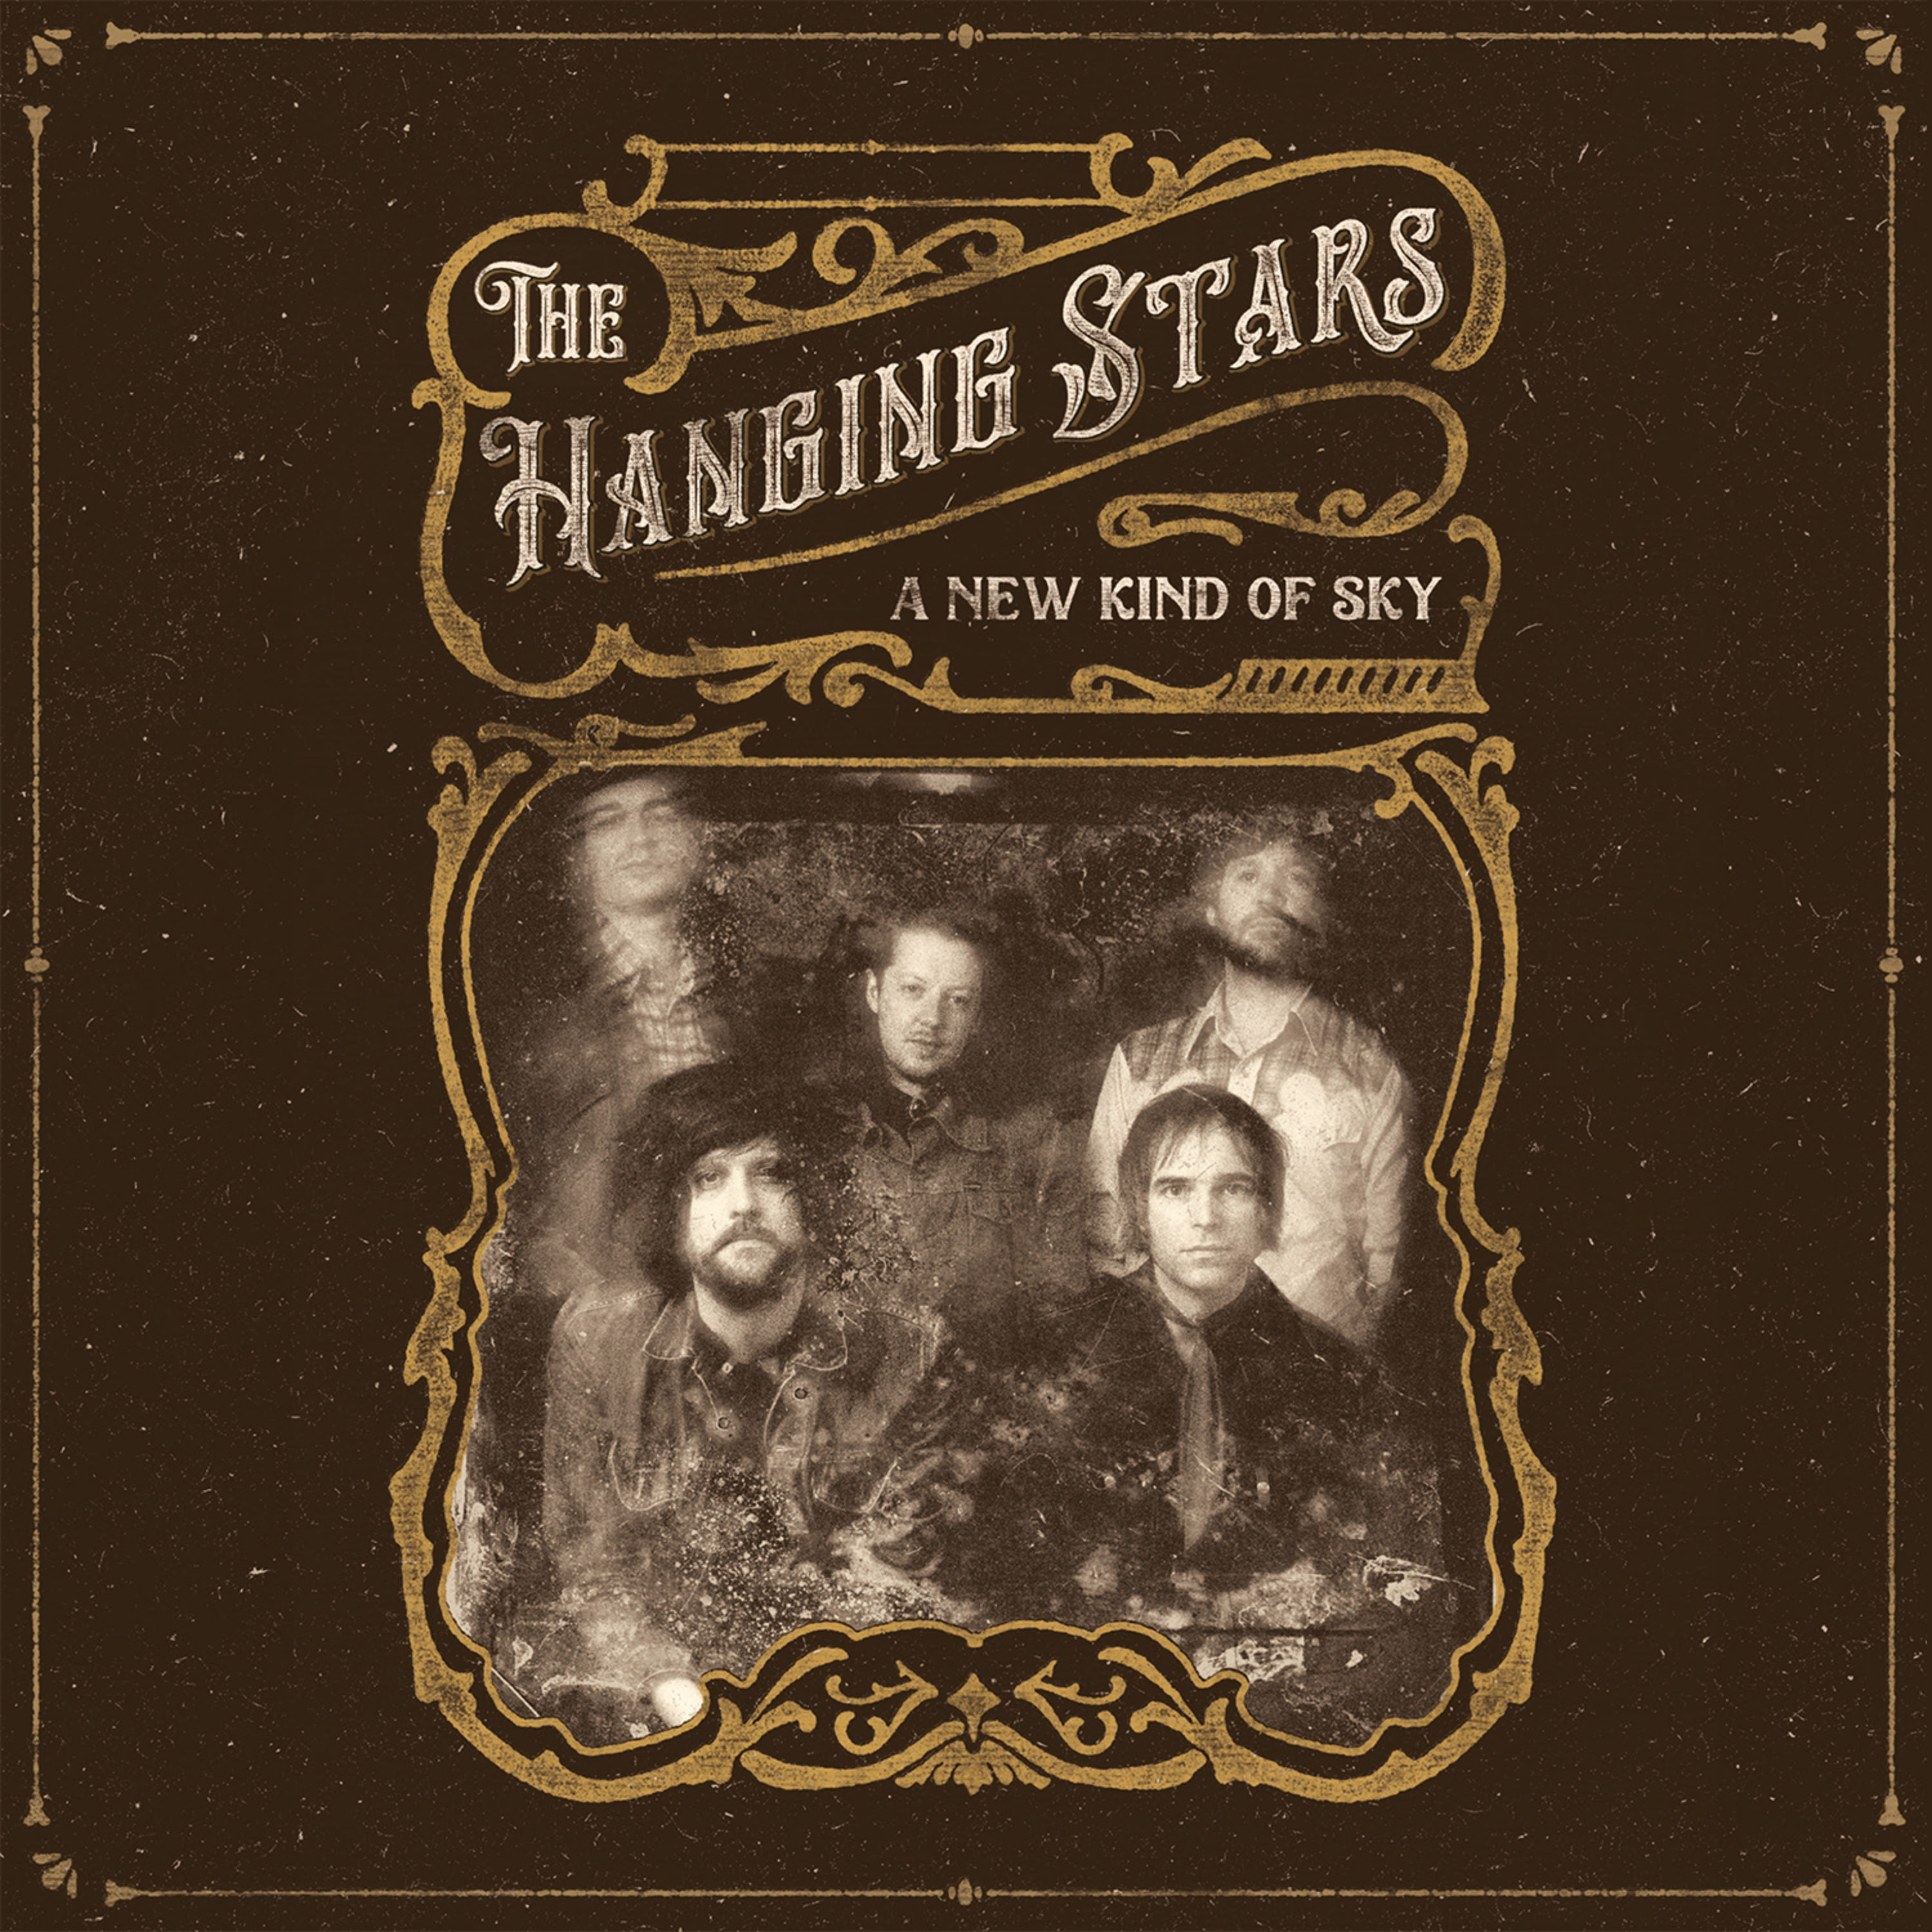 The Hanging Stars – A New Kind of Sky (2020) [FLAC 24bit/96kHz]